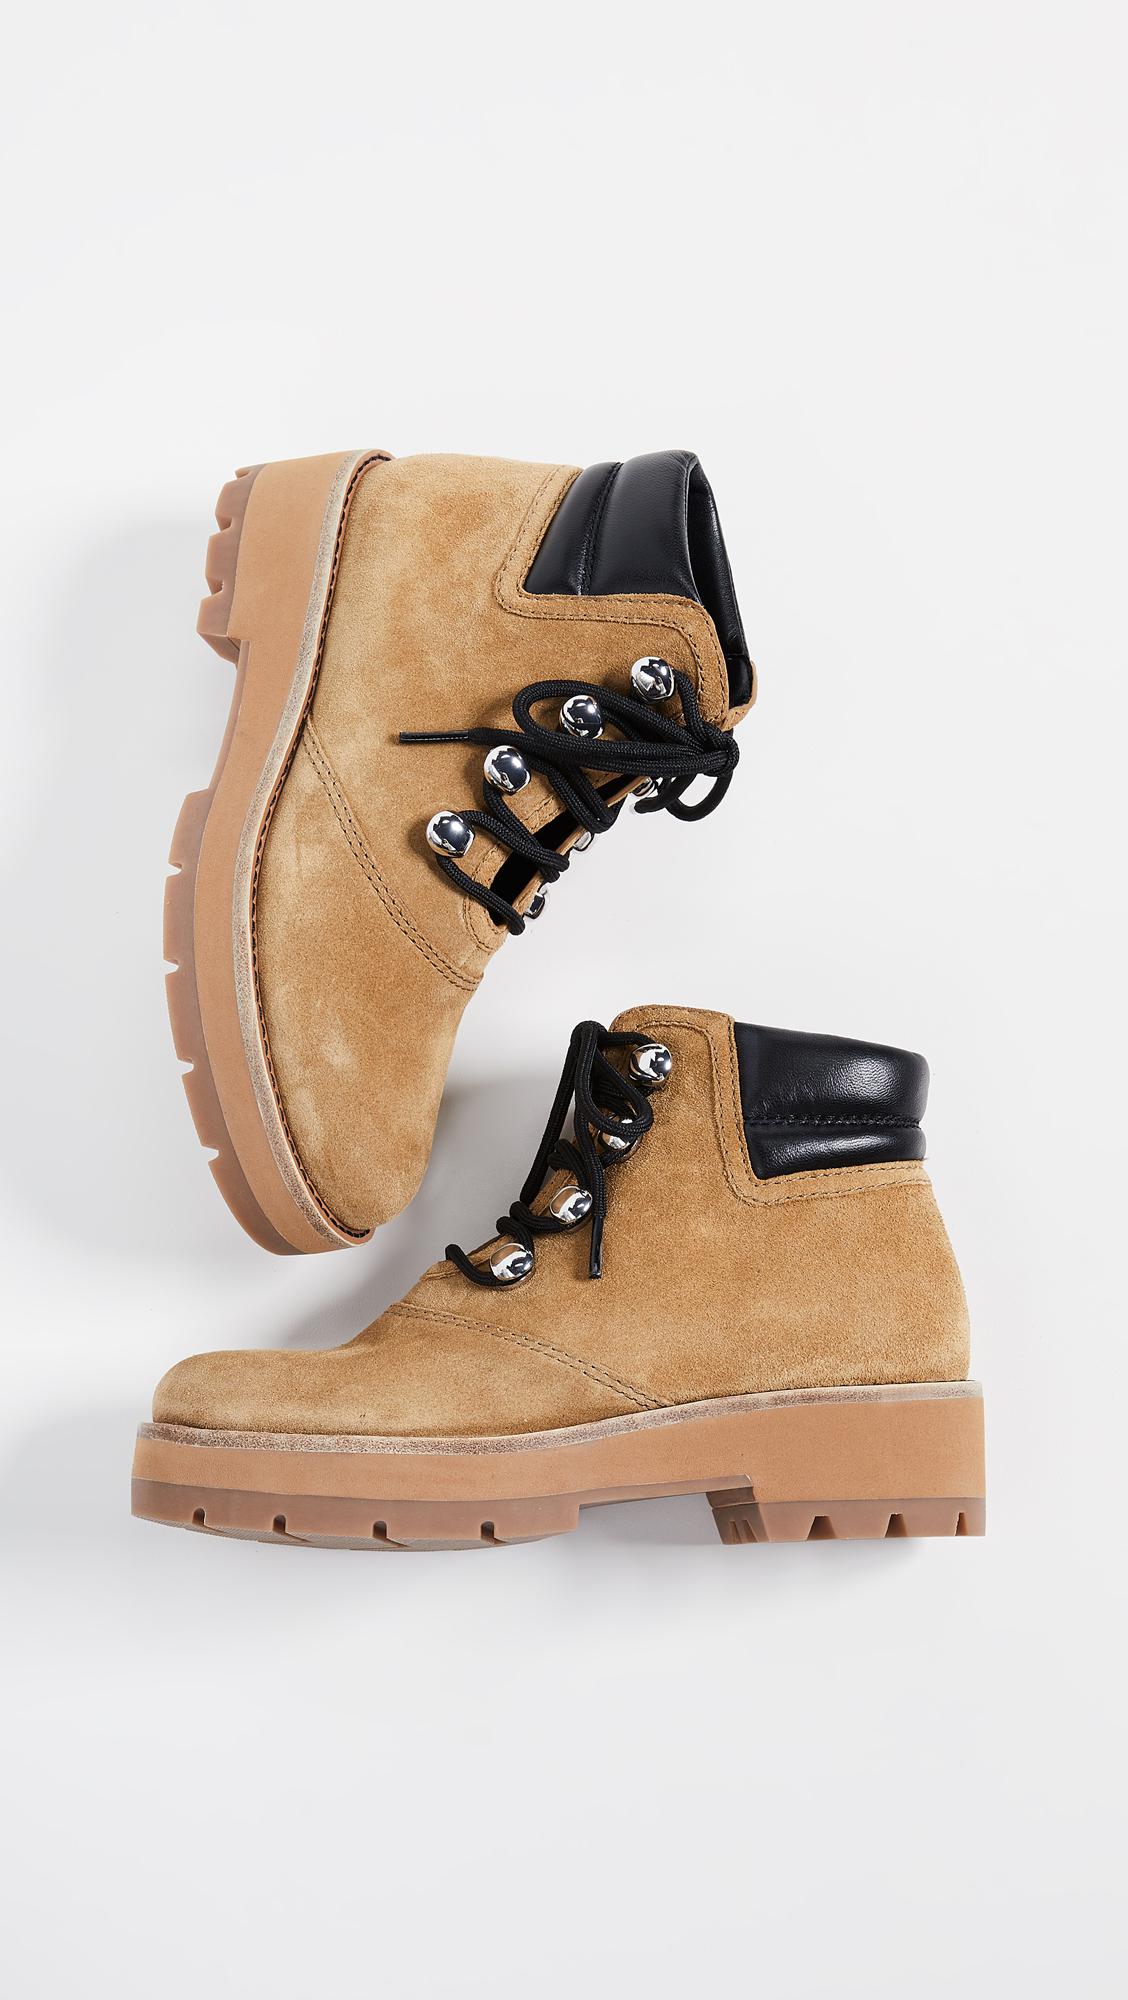 3.1 phillip lim dylan hiking boots